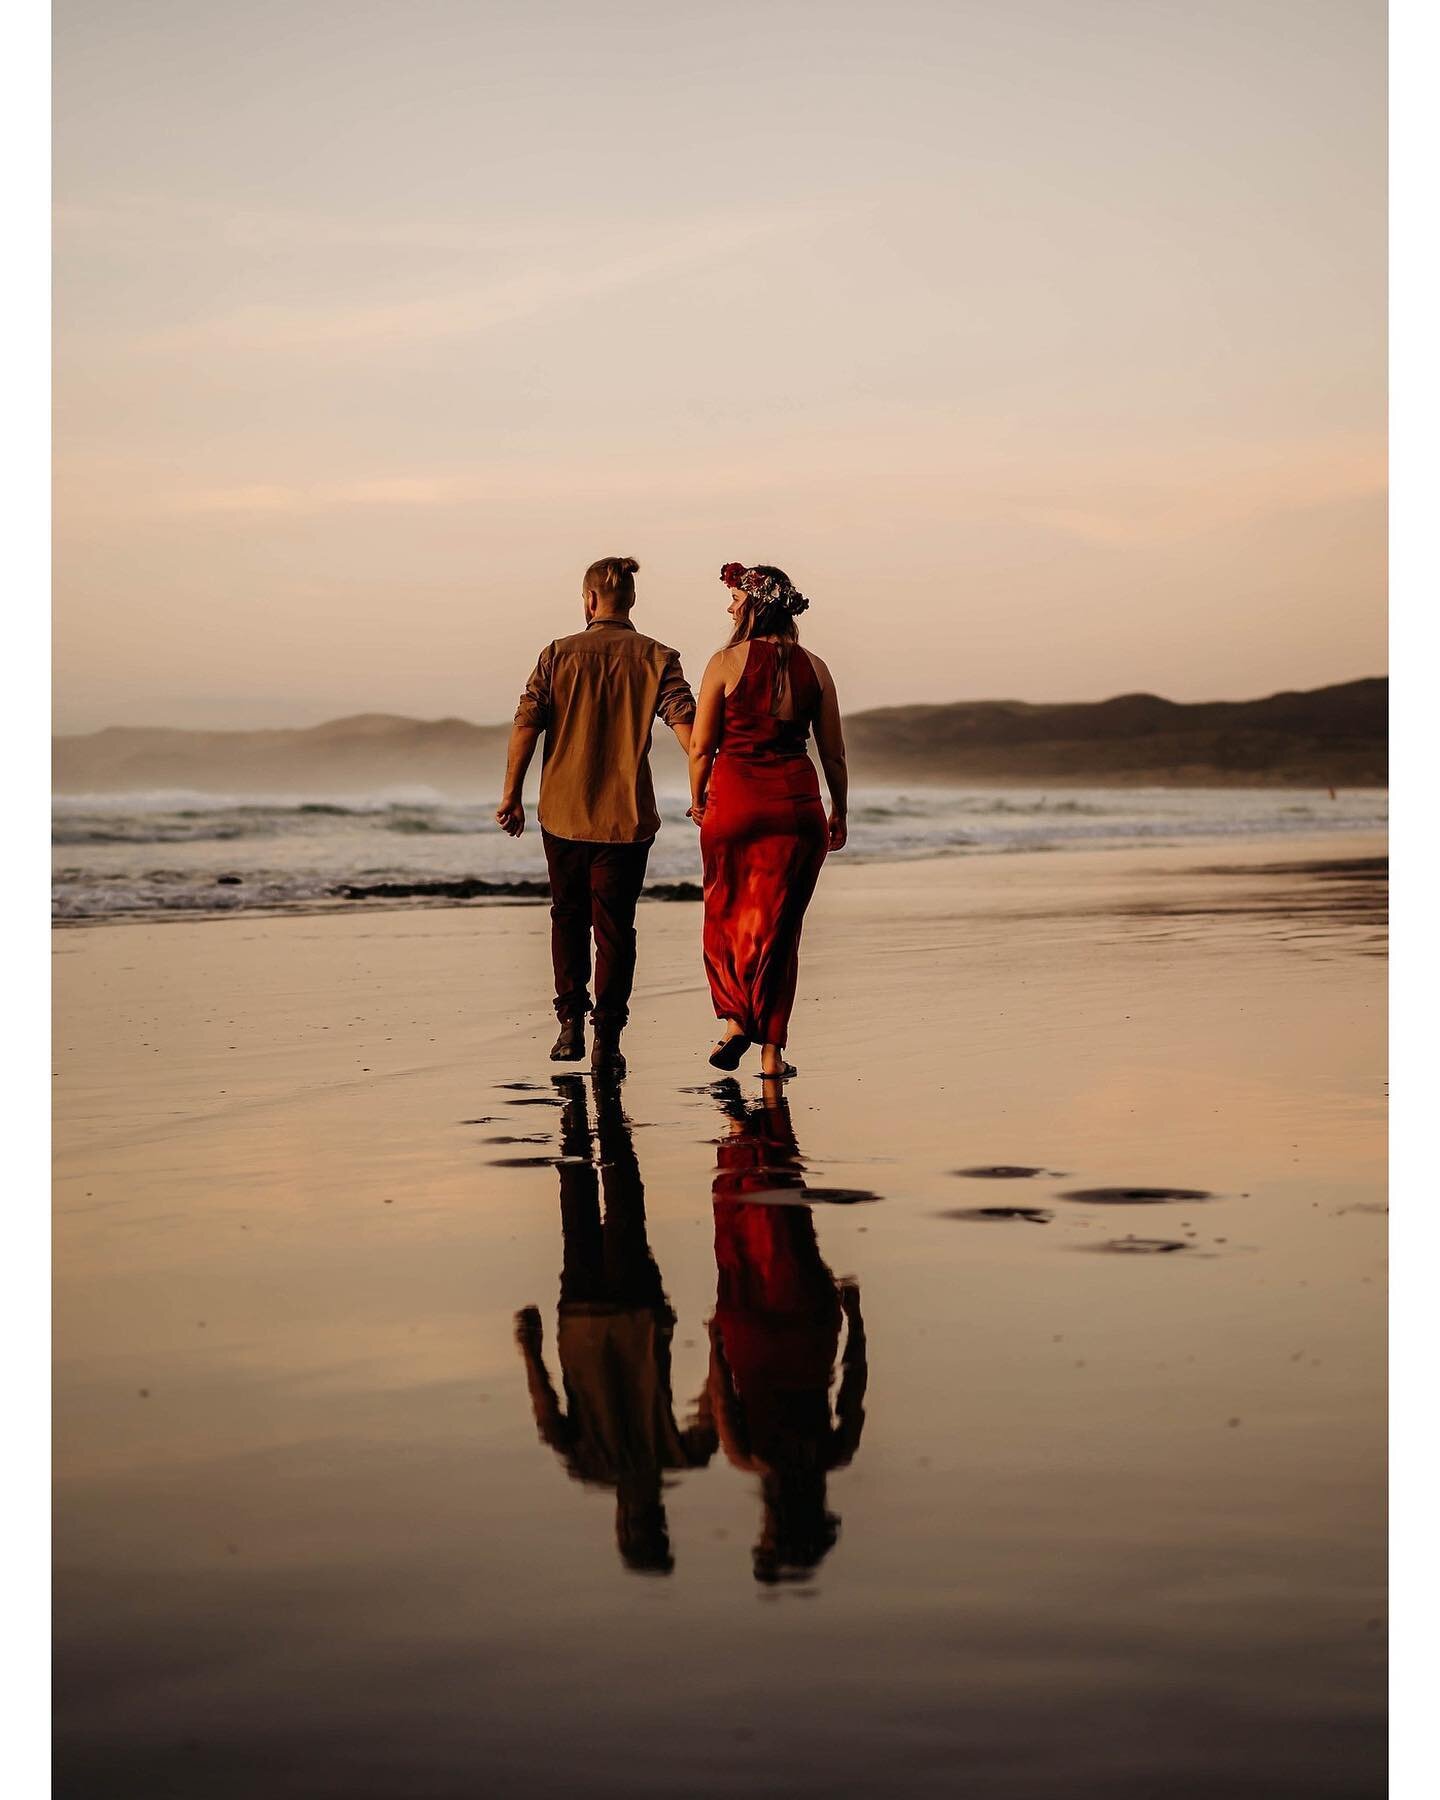 A little Bird told me that it was Jared&rsquo;s Birthday today so I cracked on with the editing of Jared and Catherine&rsquo;s engagement shoot photos from Sunday evening out at Raglan, New Zealand ....
Raglan certainly put on a light show for them w